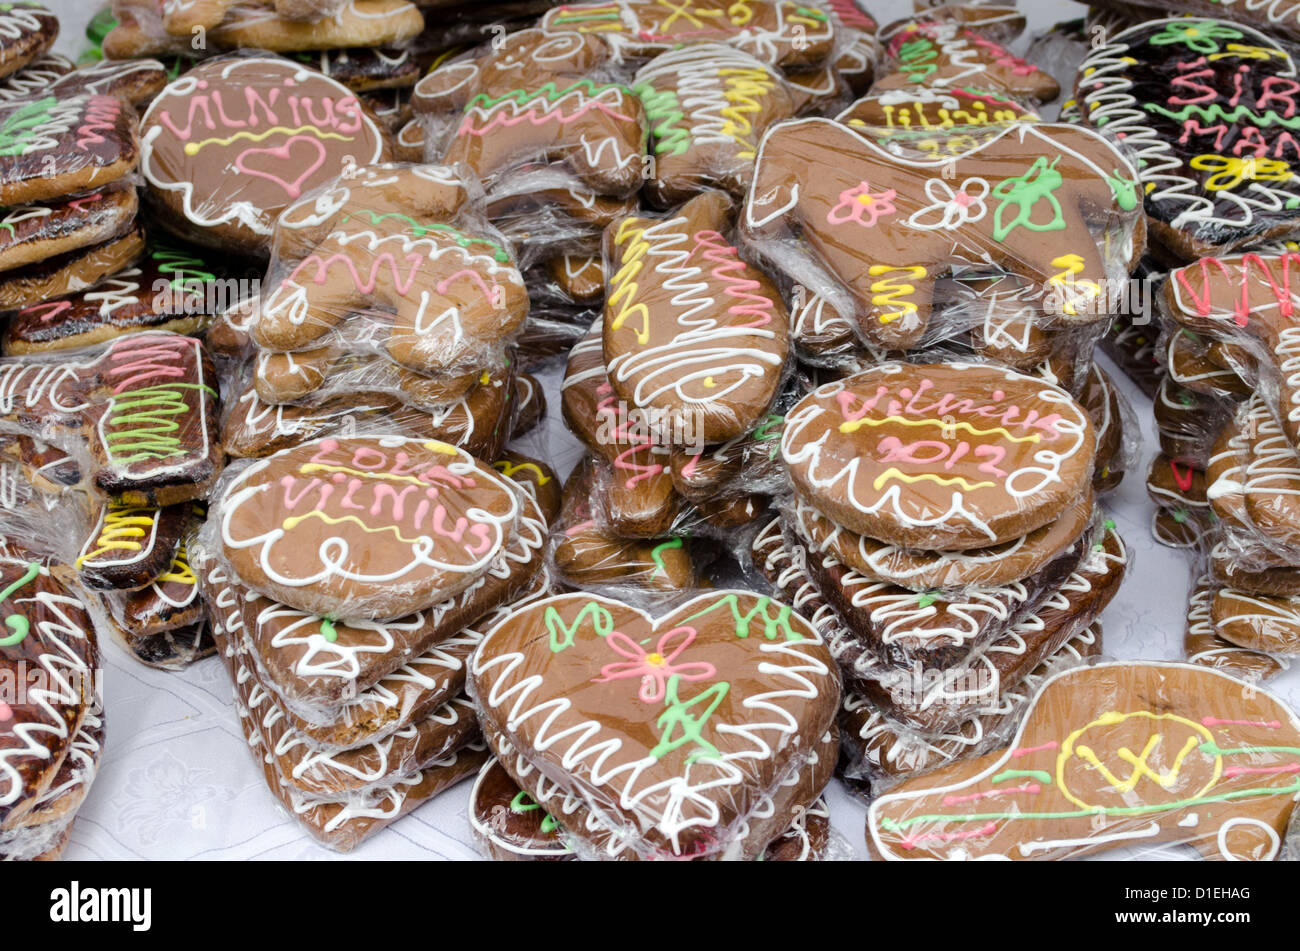 heart and round shape ecologic natural handmade sweets sold in Vilnius street day. Stock Photo